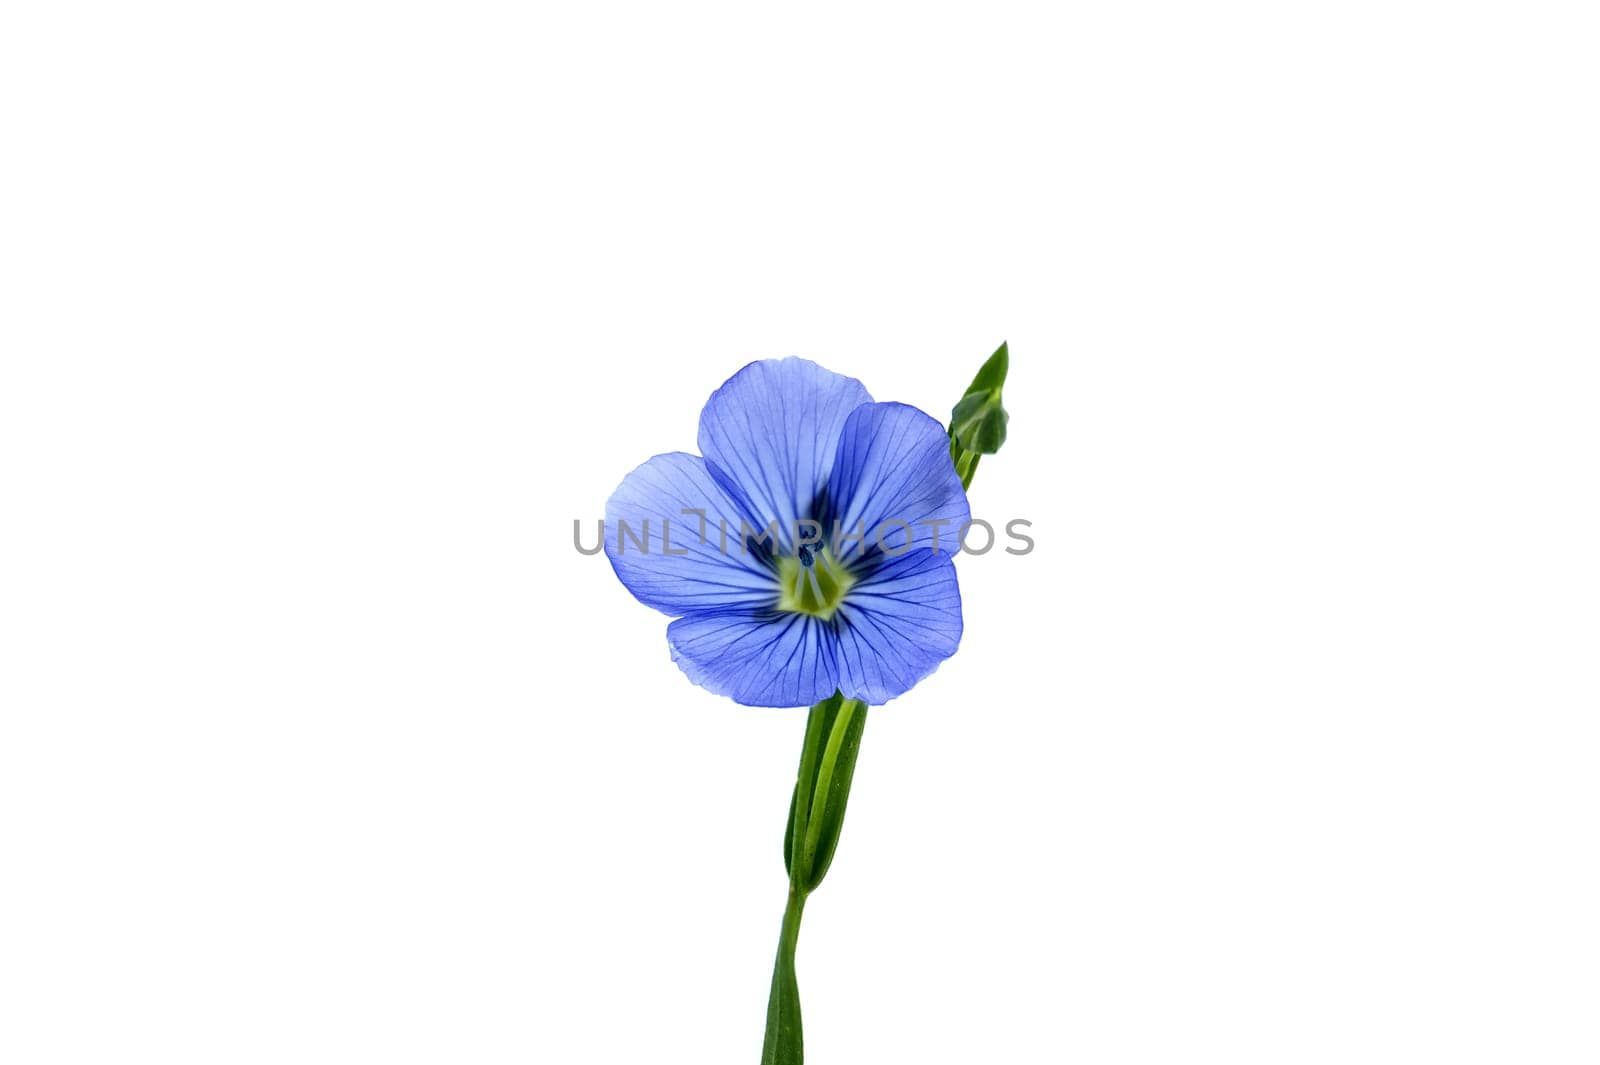 Blue flax blossom in close up isolated on white background with free space for text